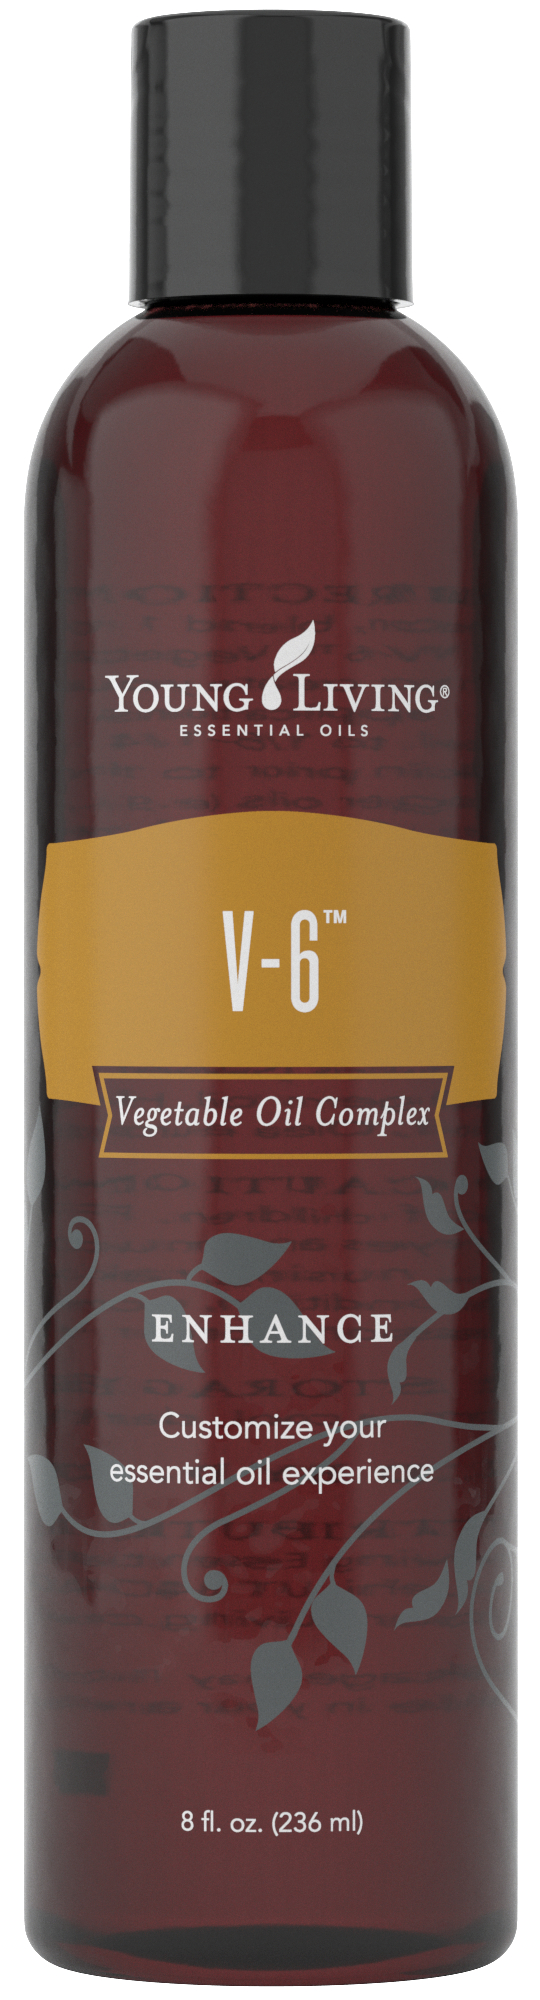 V-6 Vegetable Oil Complex - Young Living Essential Oils 